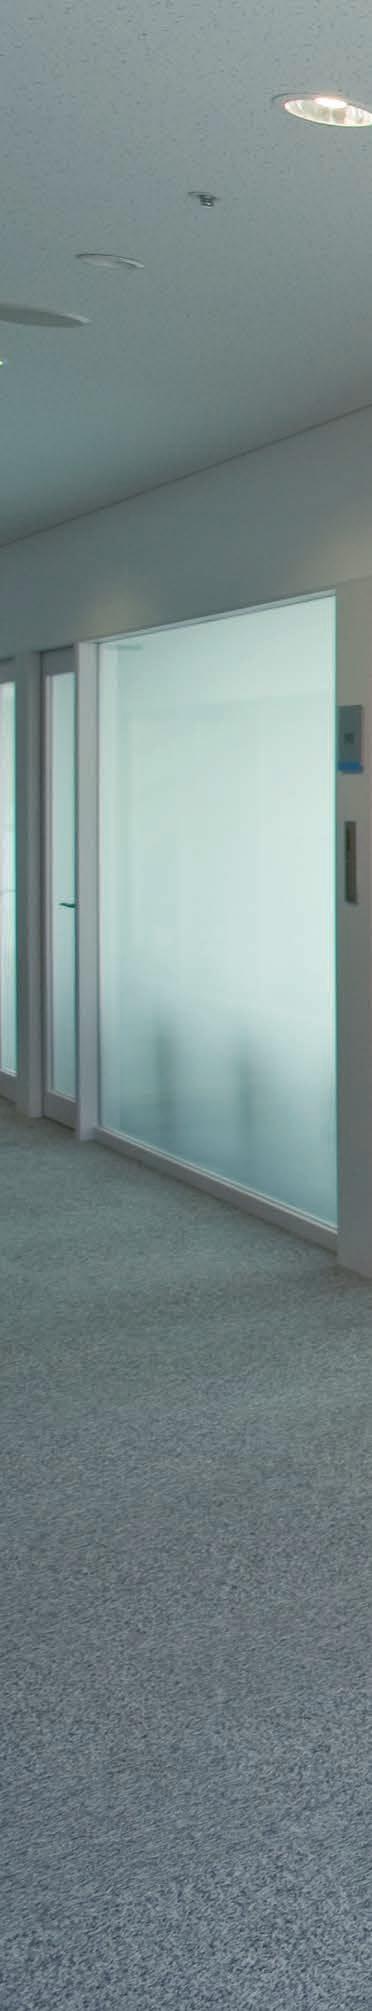 Transform glass for ambiance and privacy with 3M Decorative